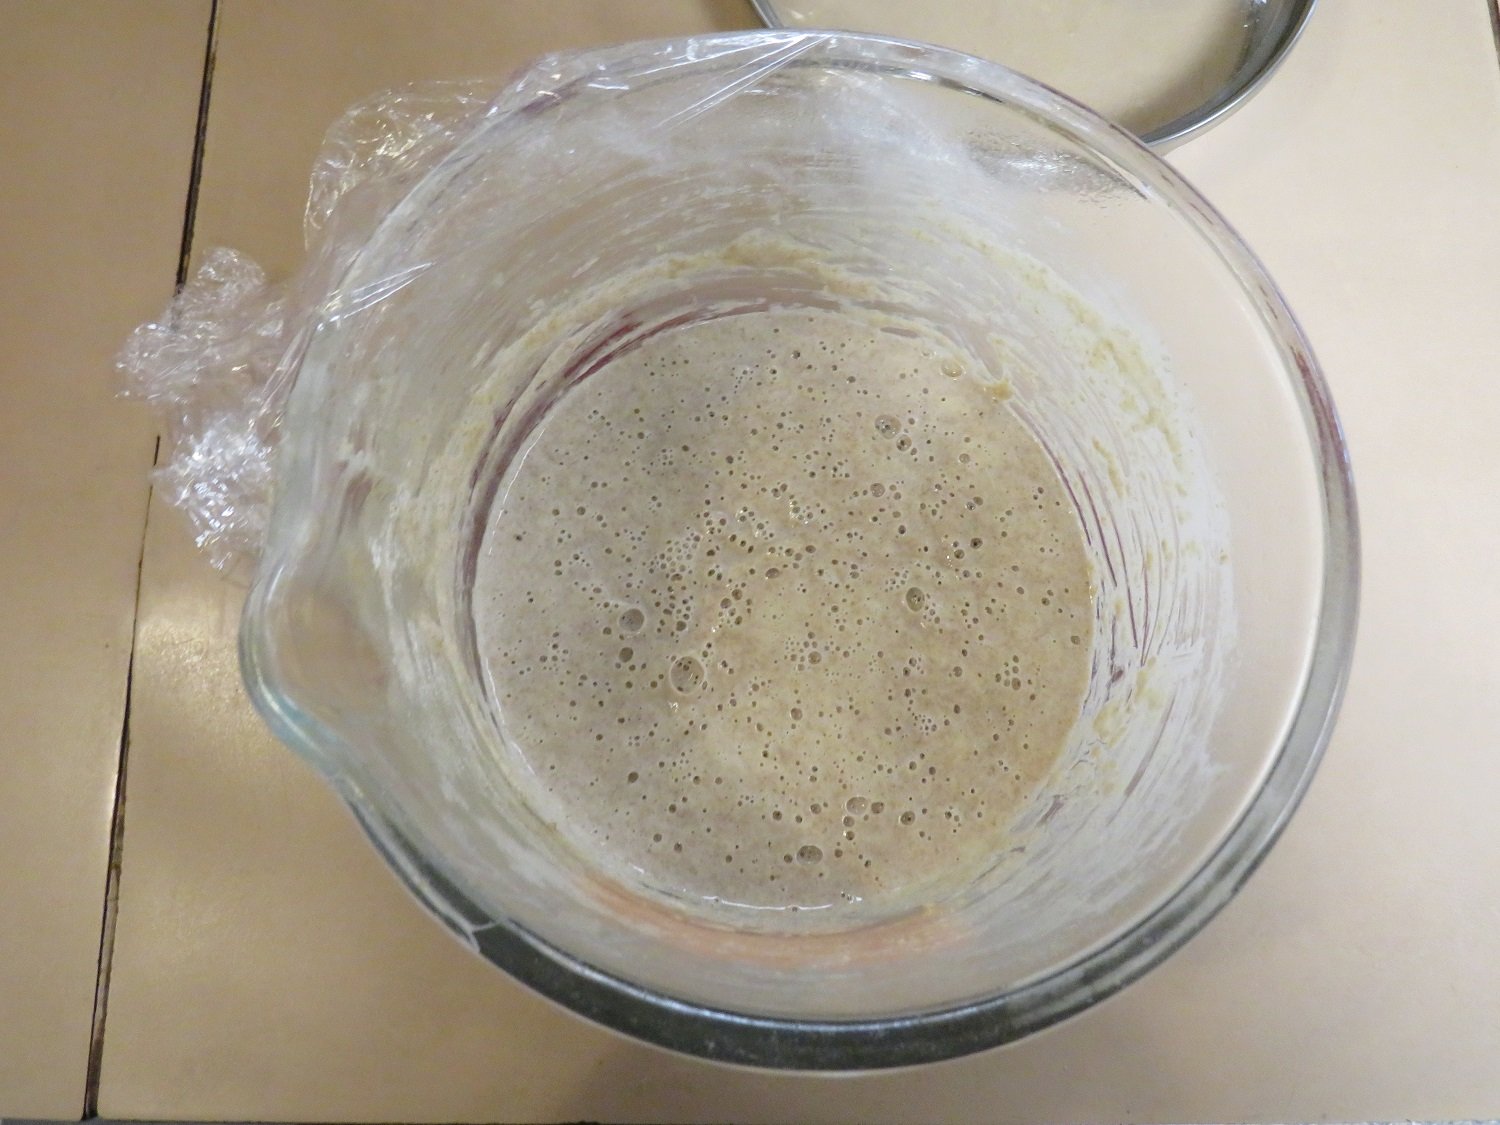  An “active” sourdough starter is full of bubbles 